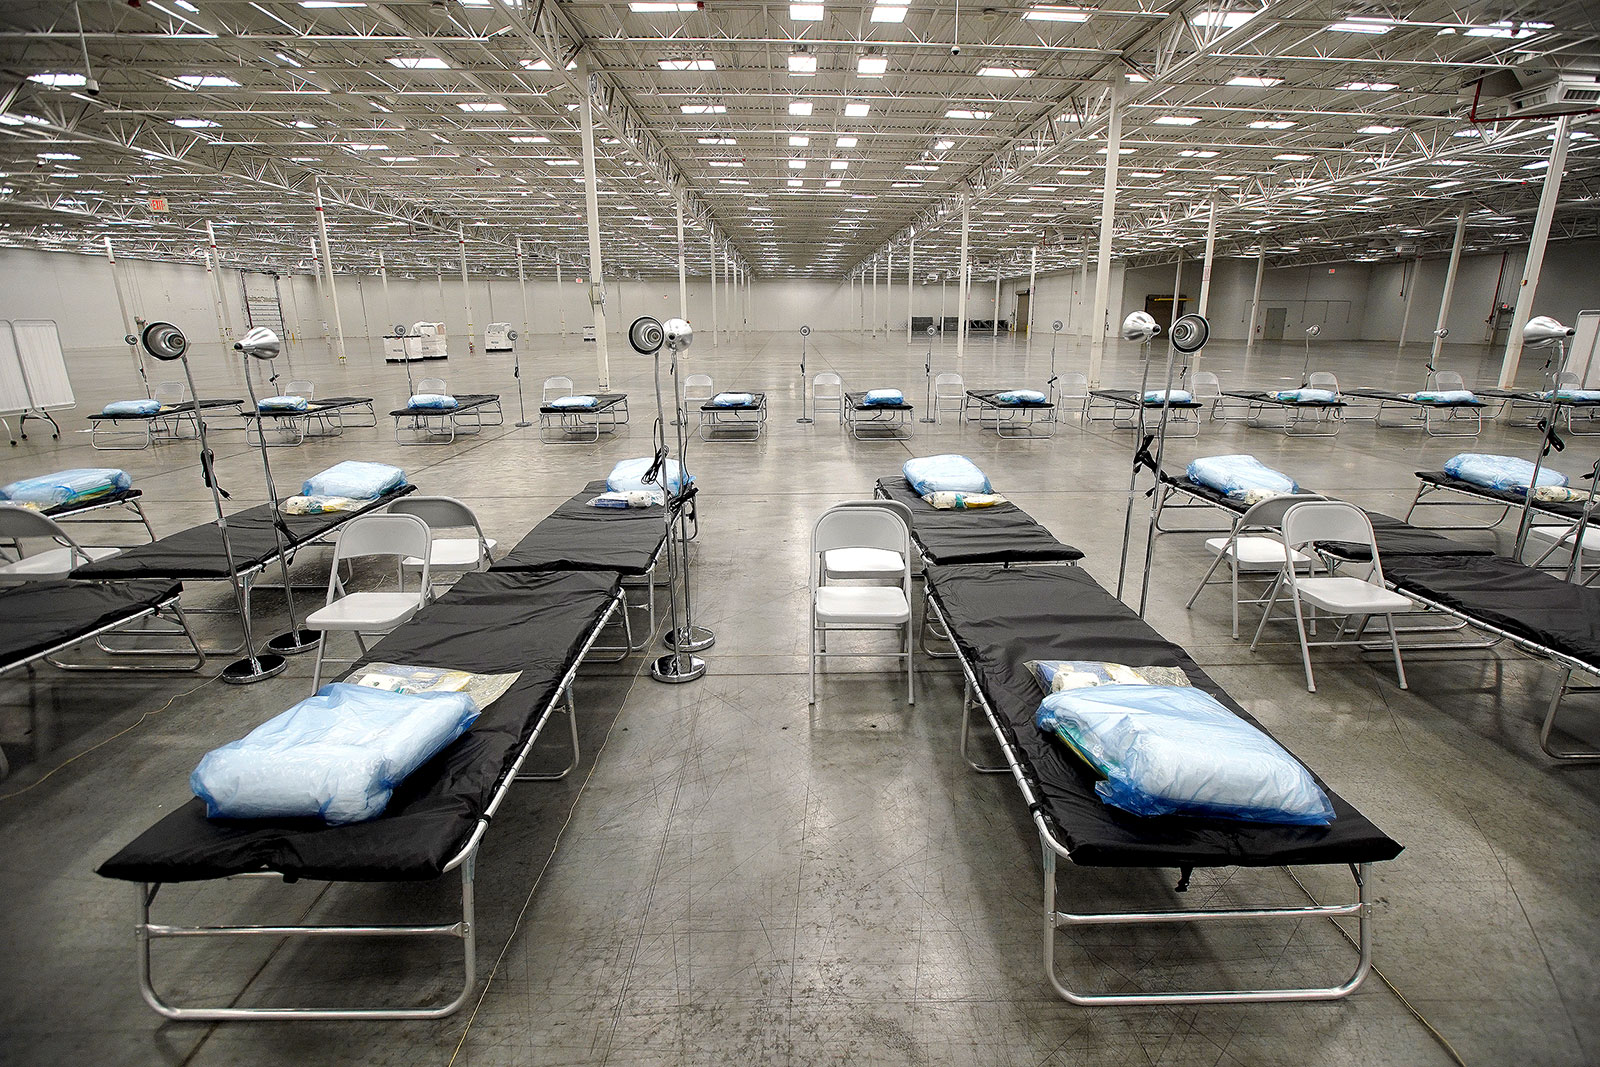 Beds are set up inside a field hospital in North Kingston, Rhode Island, on April 8.